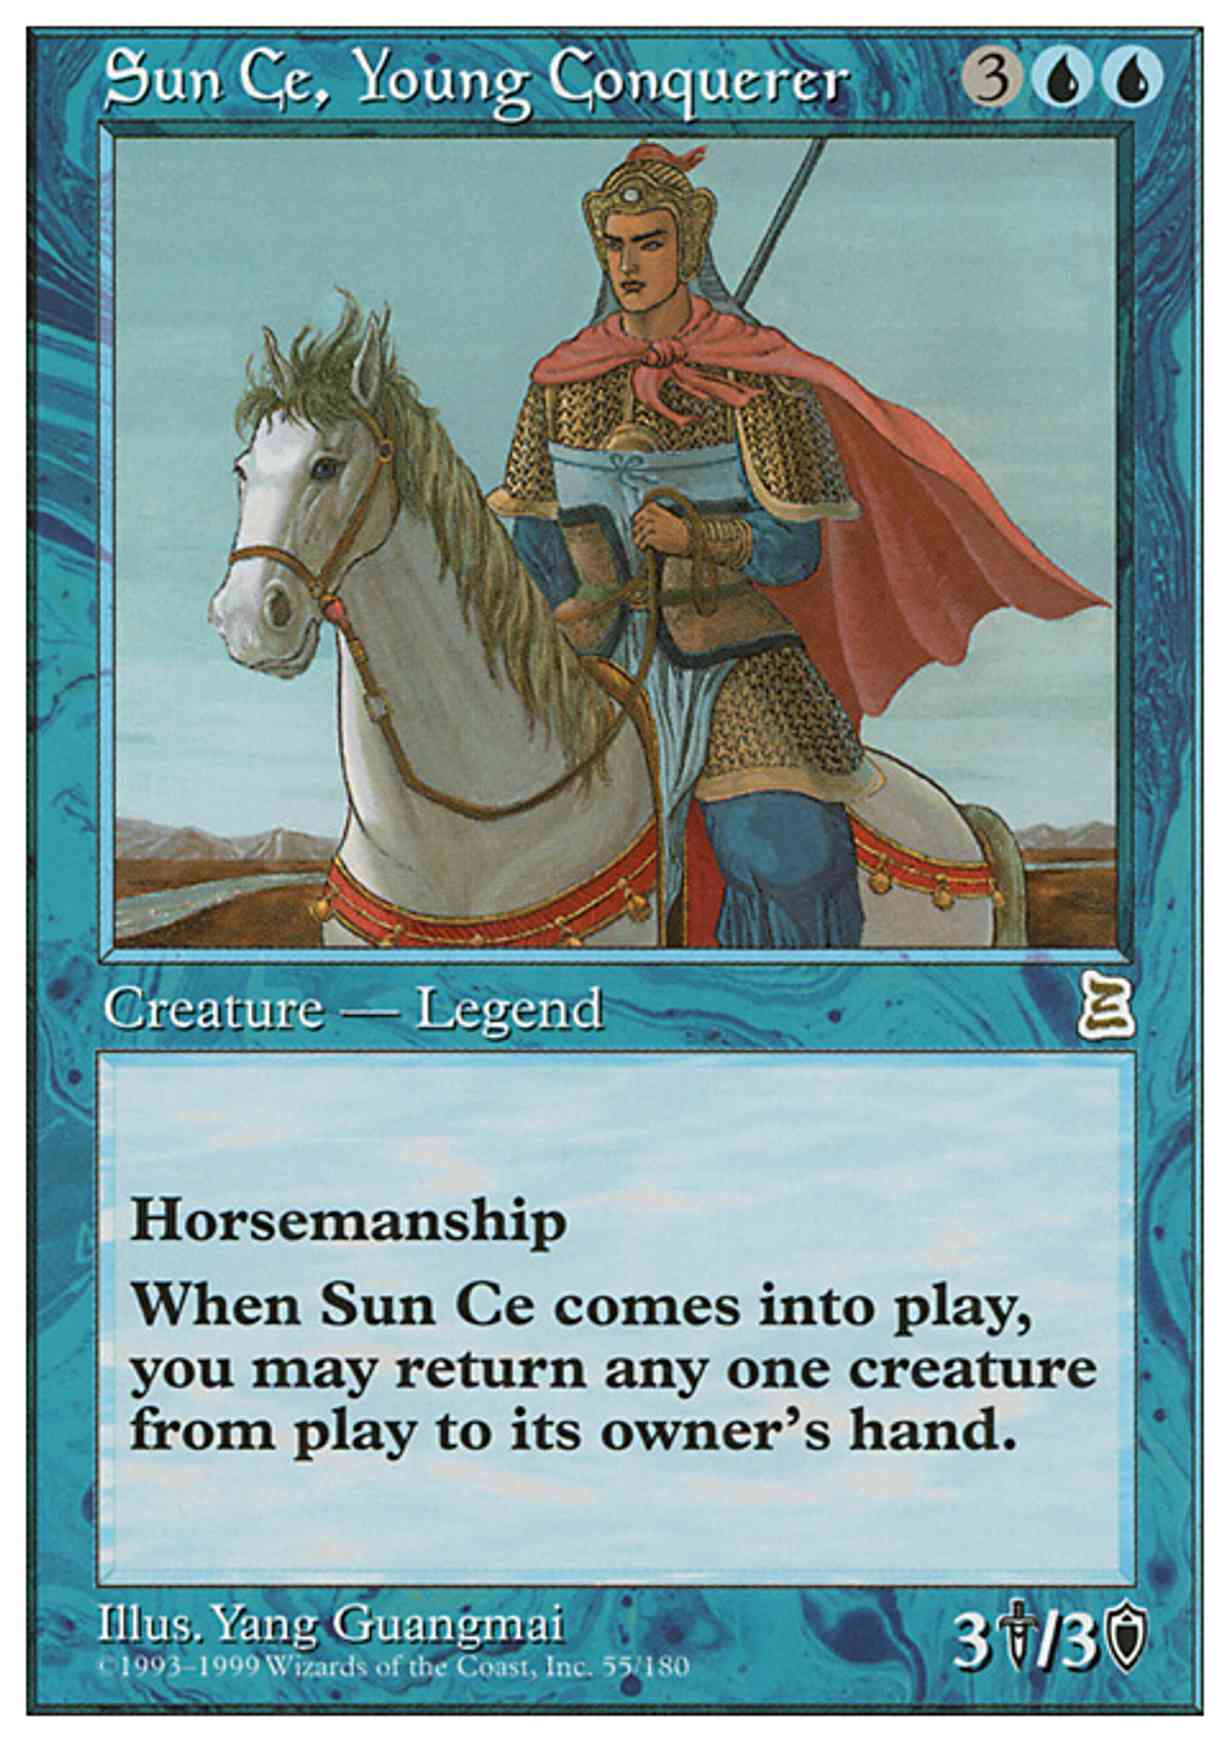 Sun Ce, Young Conquerer magic card front